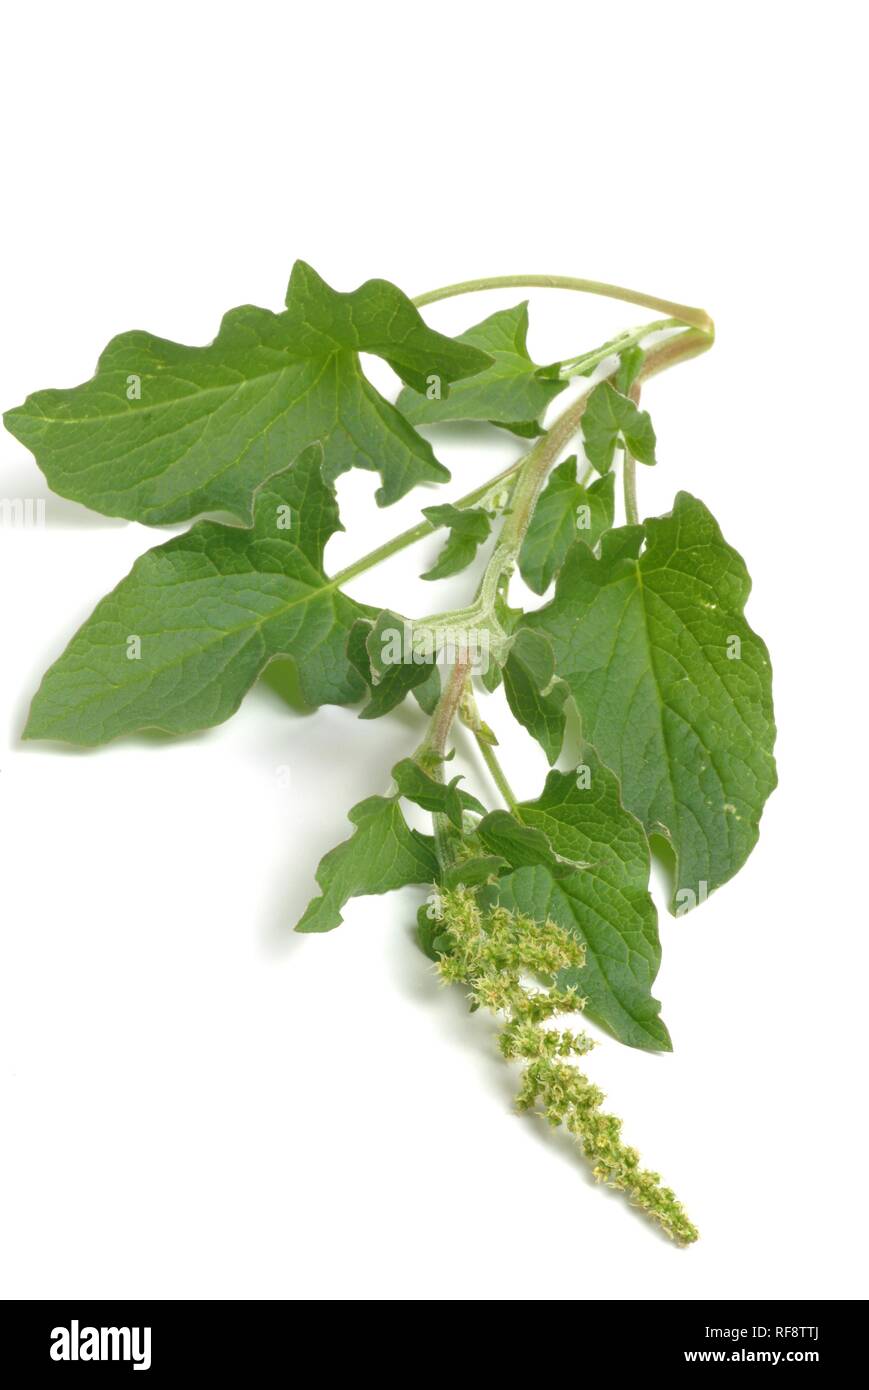 Good King Henry or Poor Man's Asparagus or Lincolnshire Spinach (Chenopodium bonus-henricus) Stock Photo